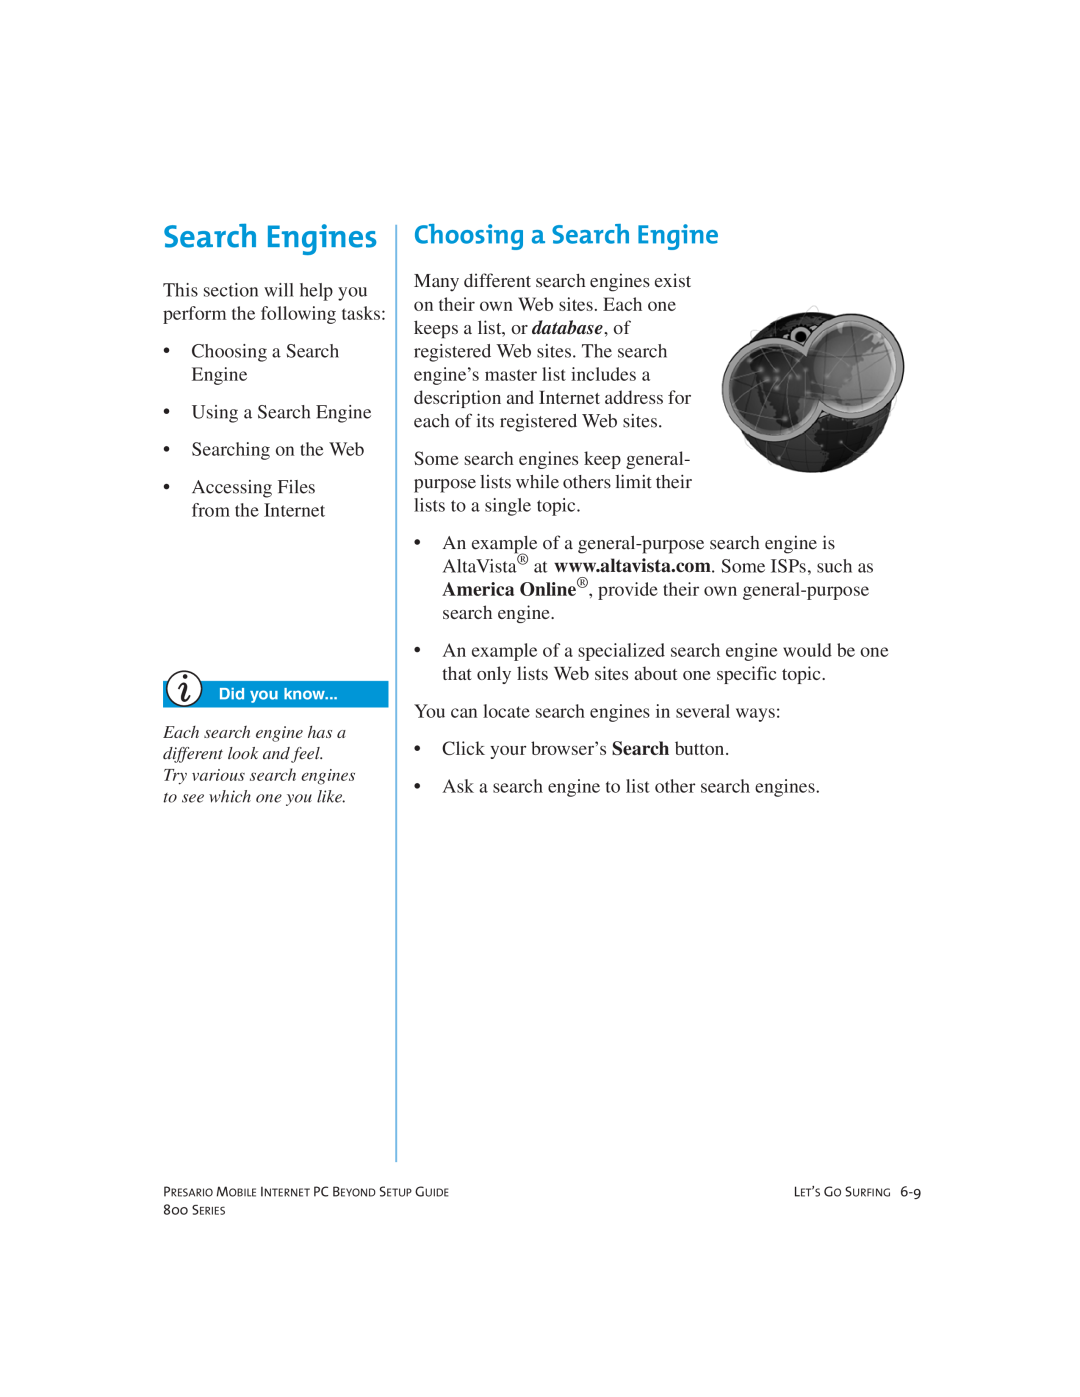 Compaq 800 manual Search Engines, Choosing a Search Engine 